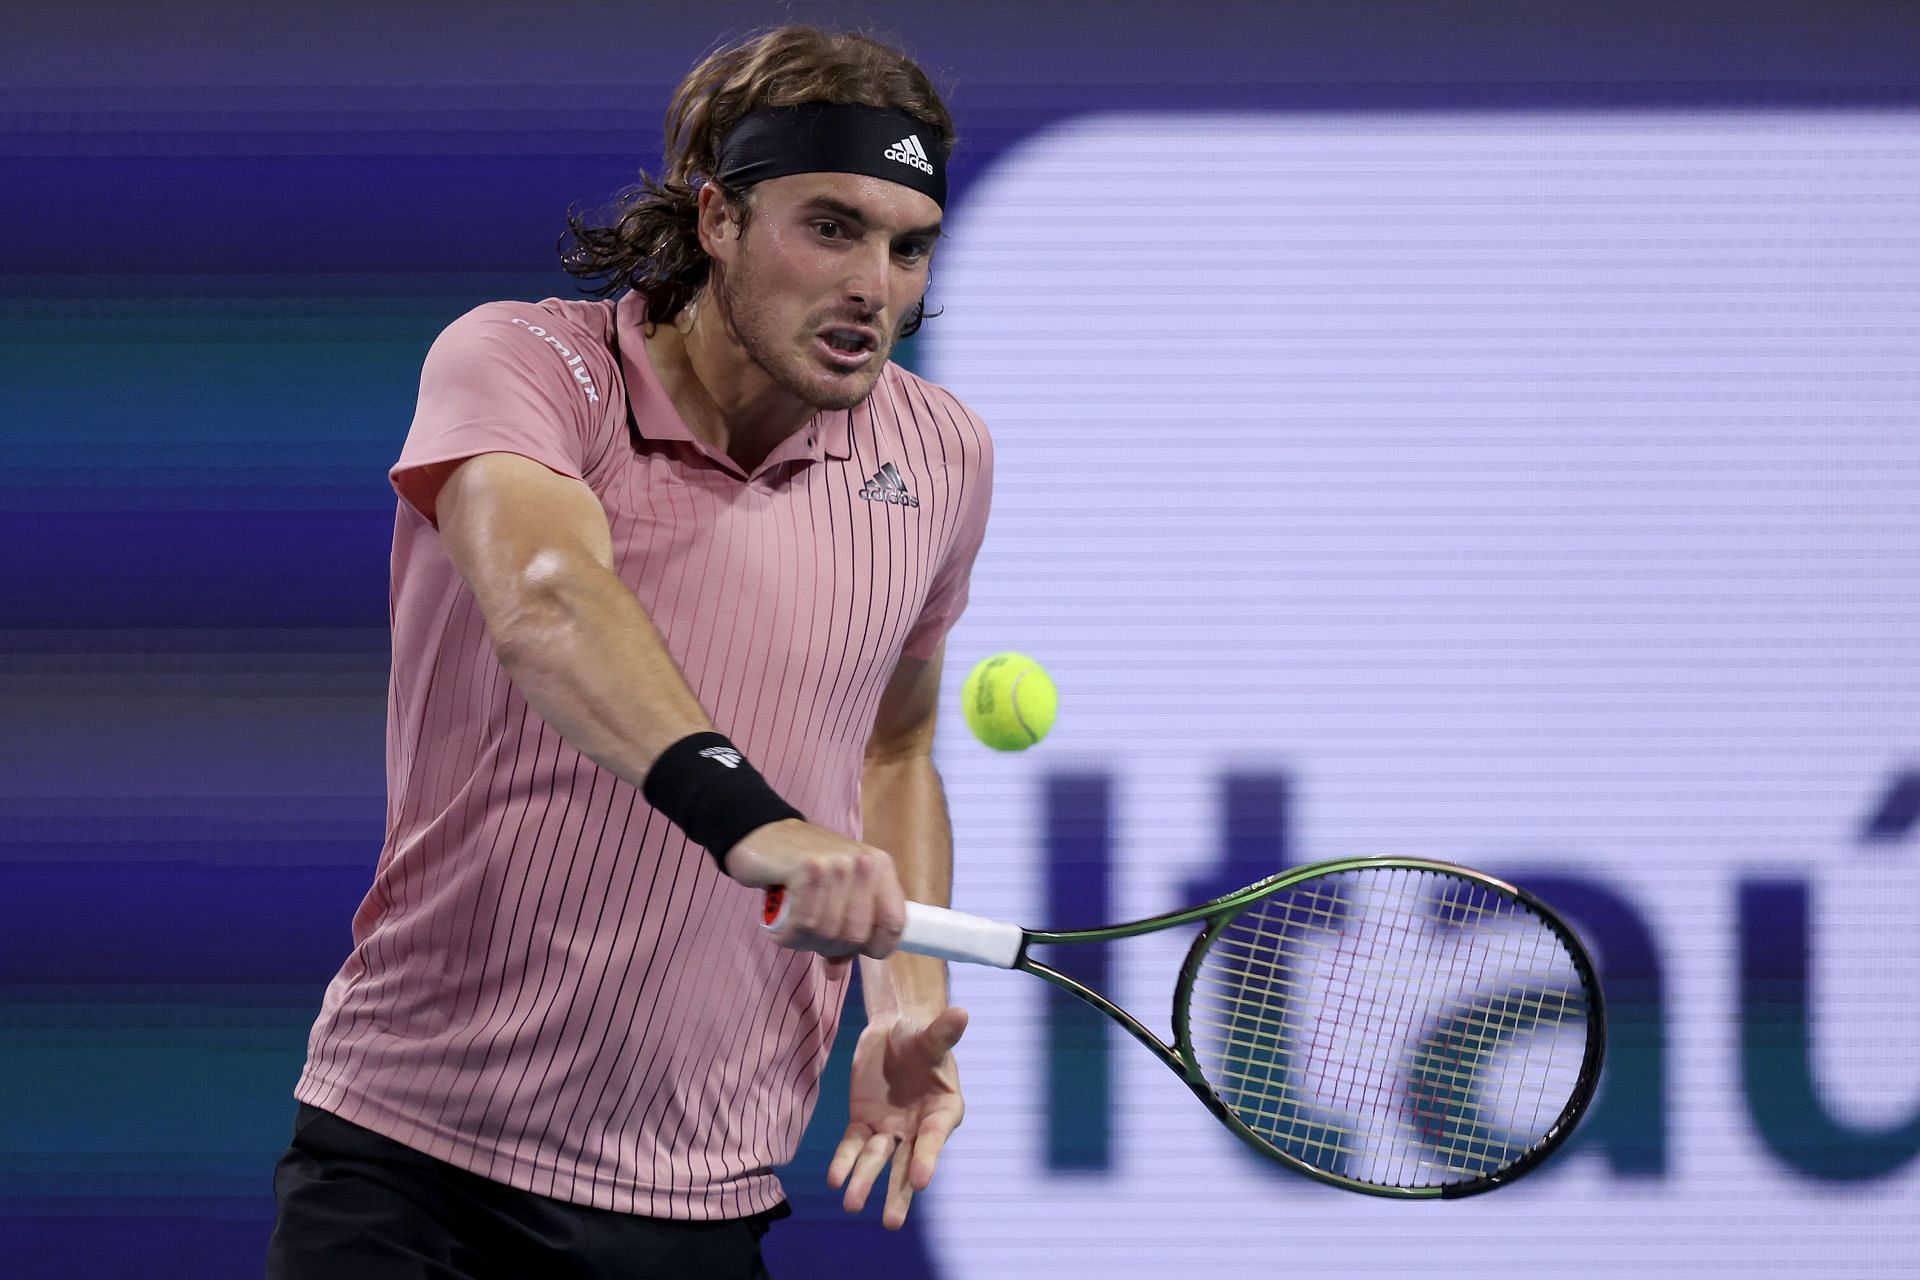 Tsitsipas plays a backhand at the 2022 Miami Open